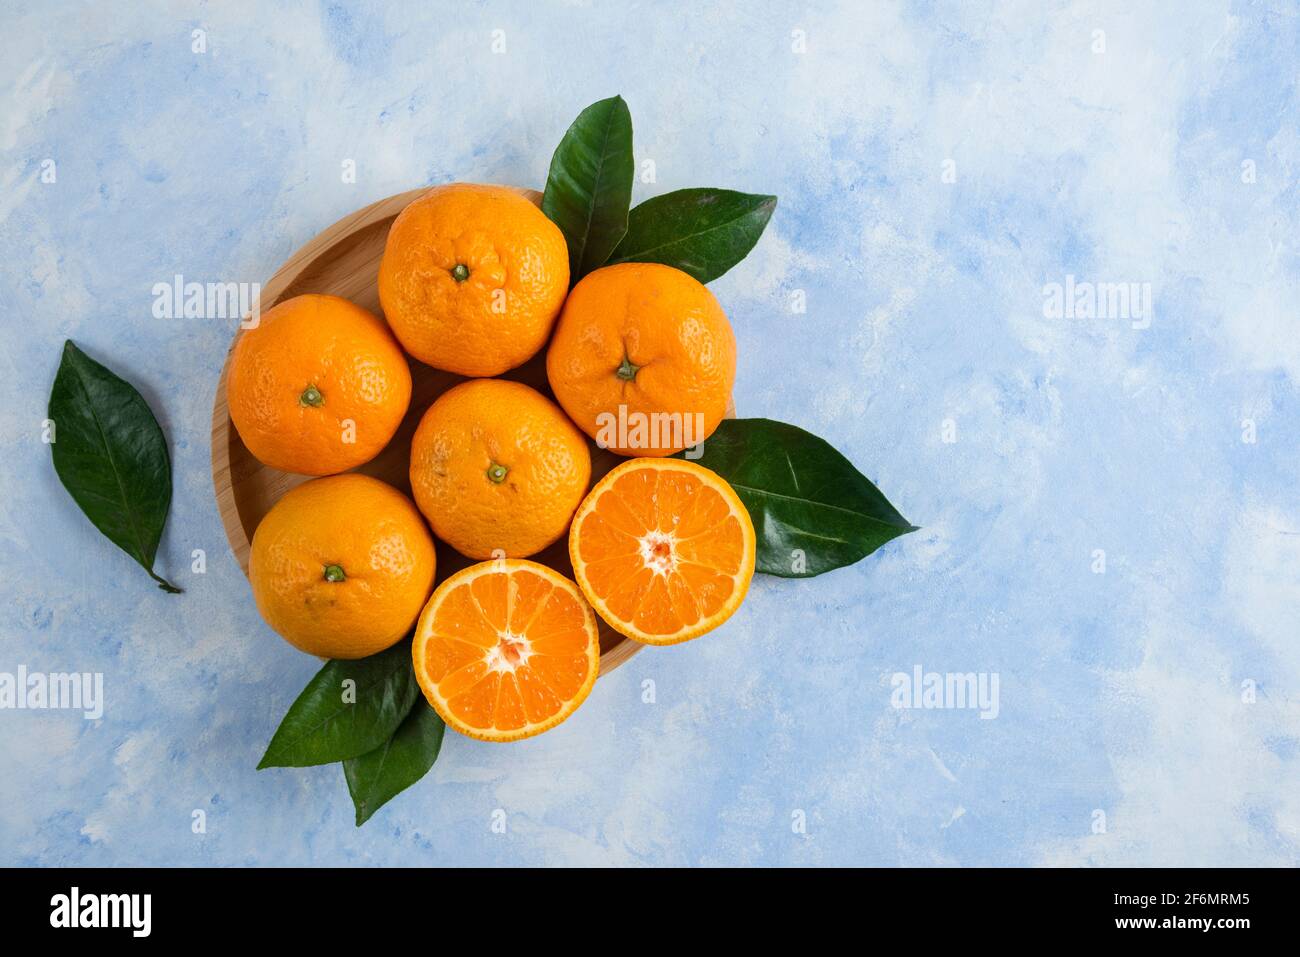 Top view of clementine mandarins with leaves on wooden plate Stock Photo